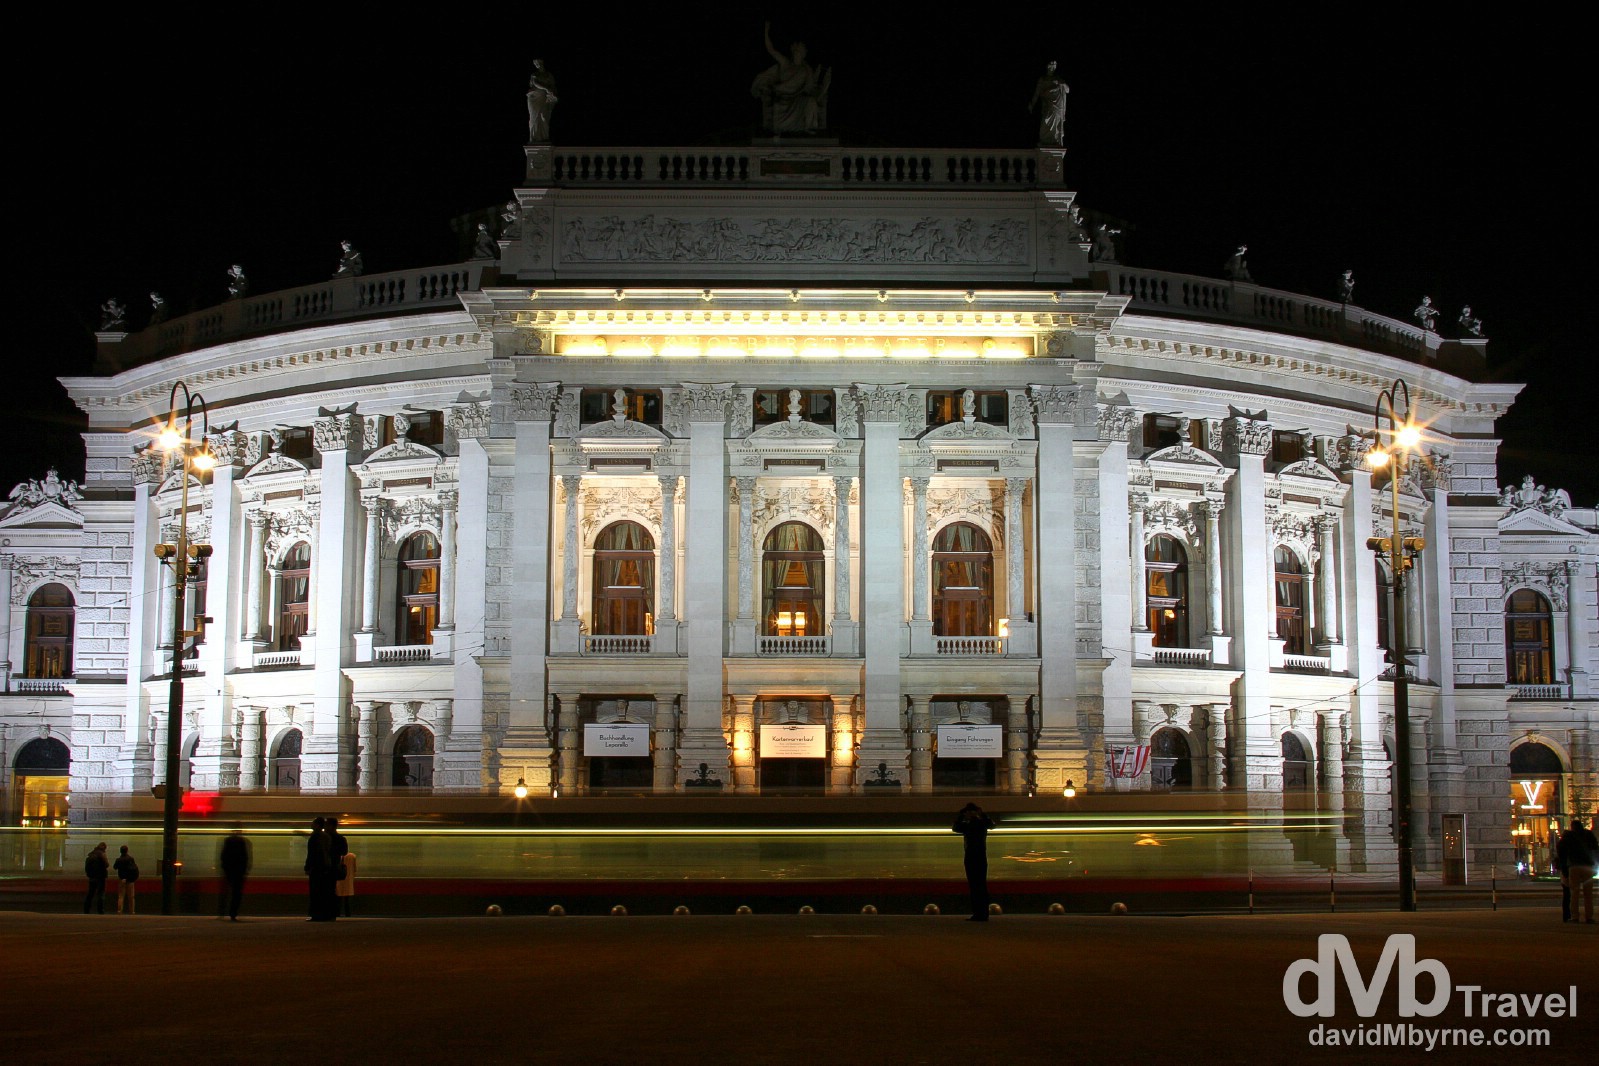 A tram passing in front of Burgtheater in Vienna, Austria. march 29th, 2014.